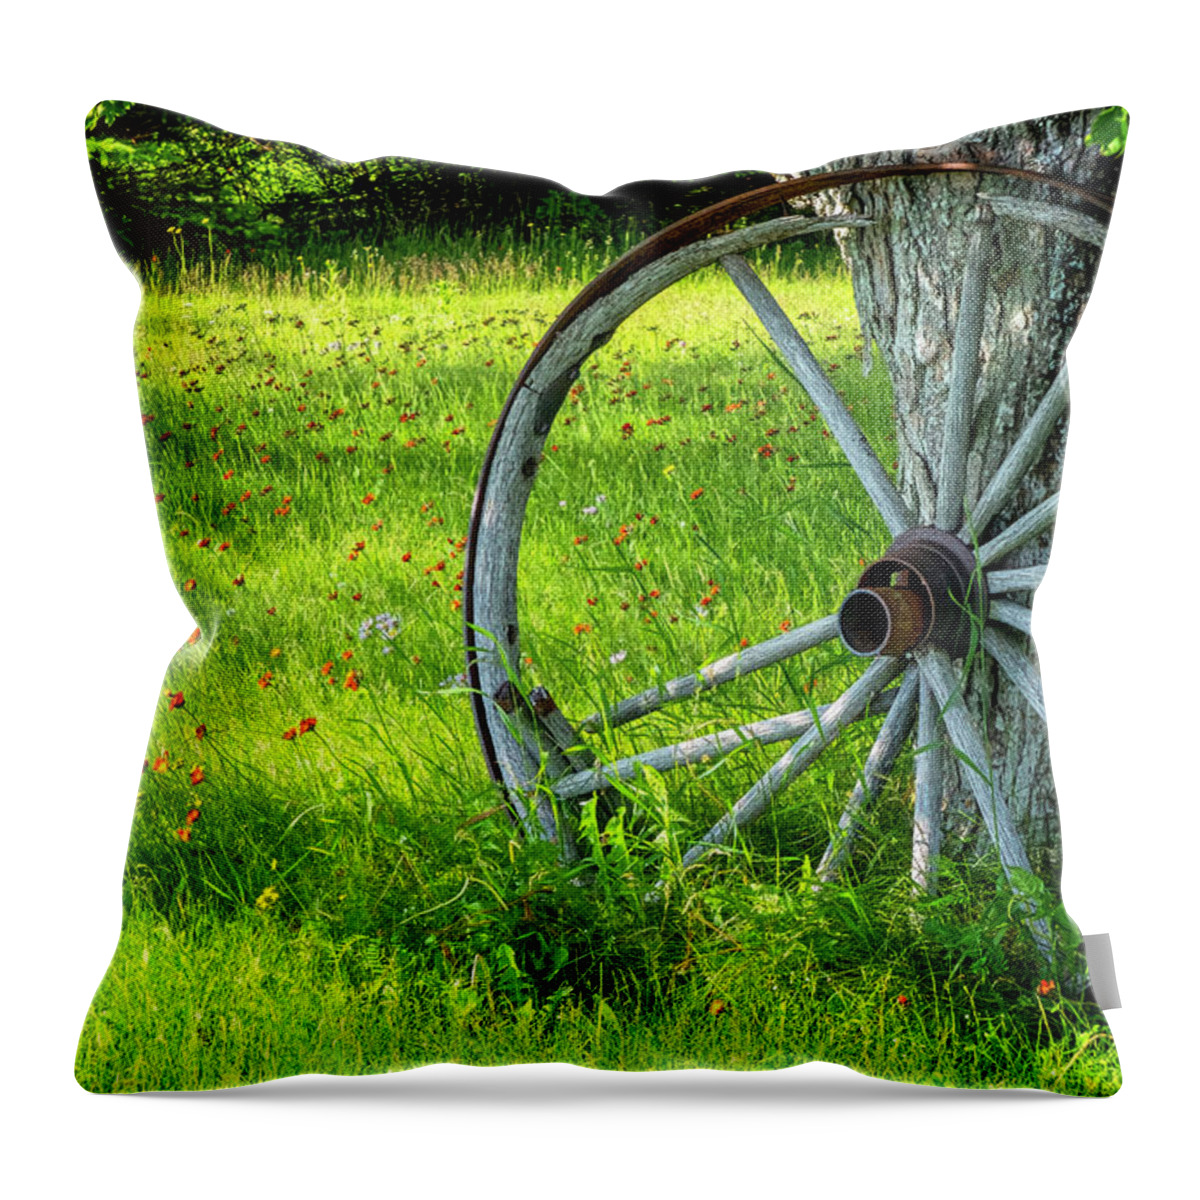 East Dover Vermont Throw Pillow featuring the photograph Wagon Wheel #1 by Tom Singleton